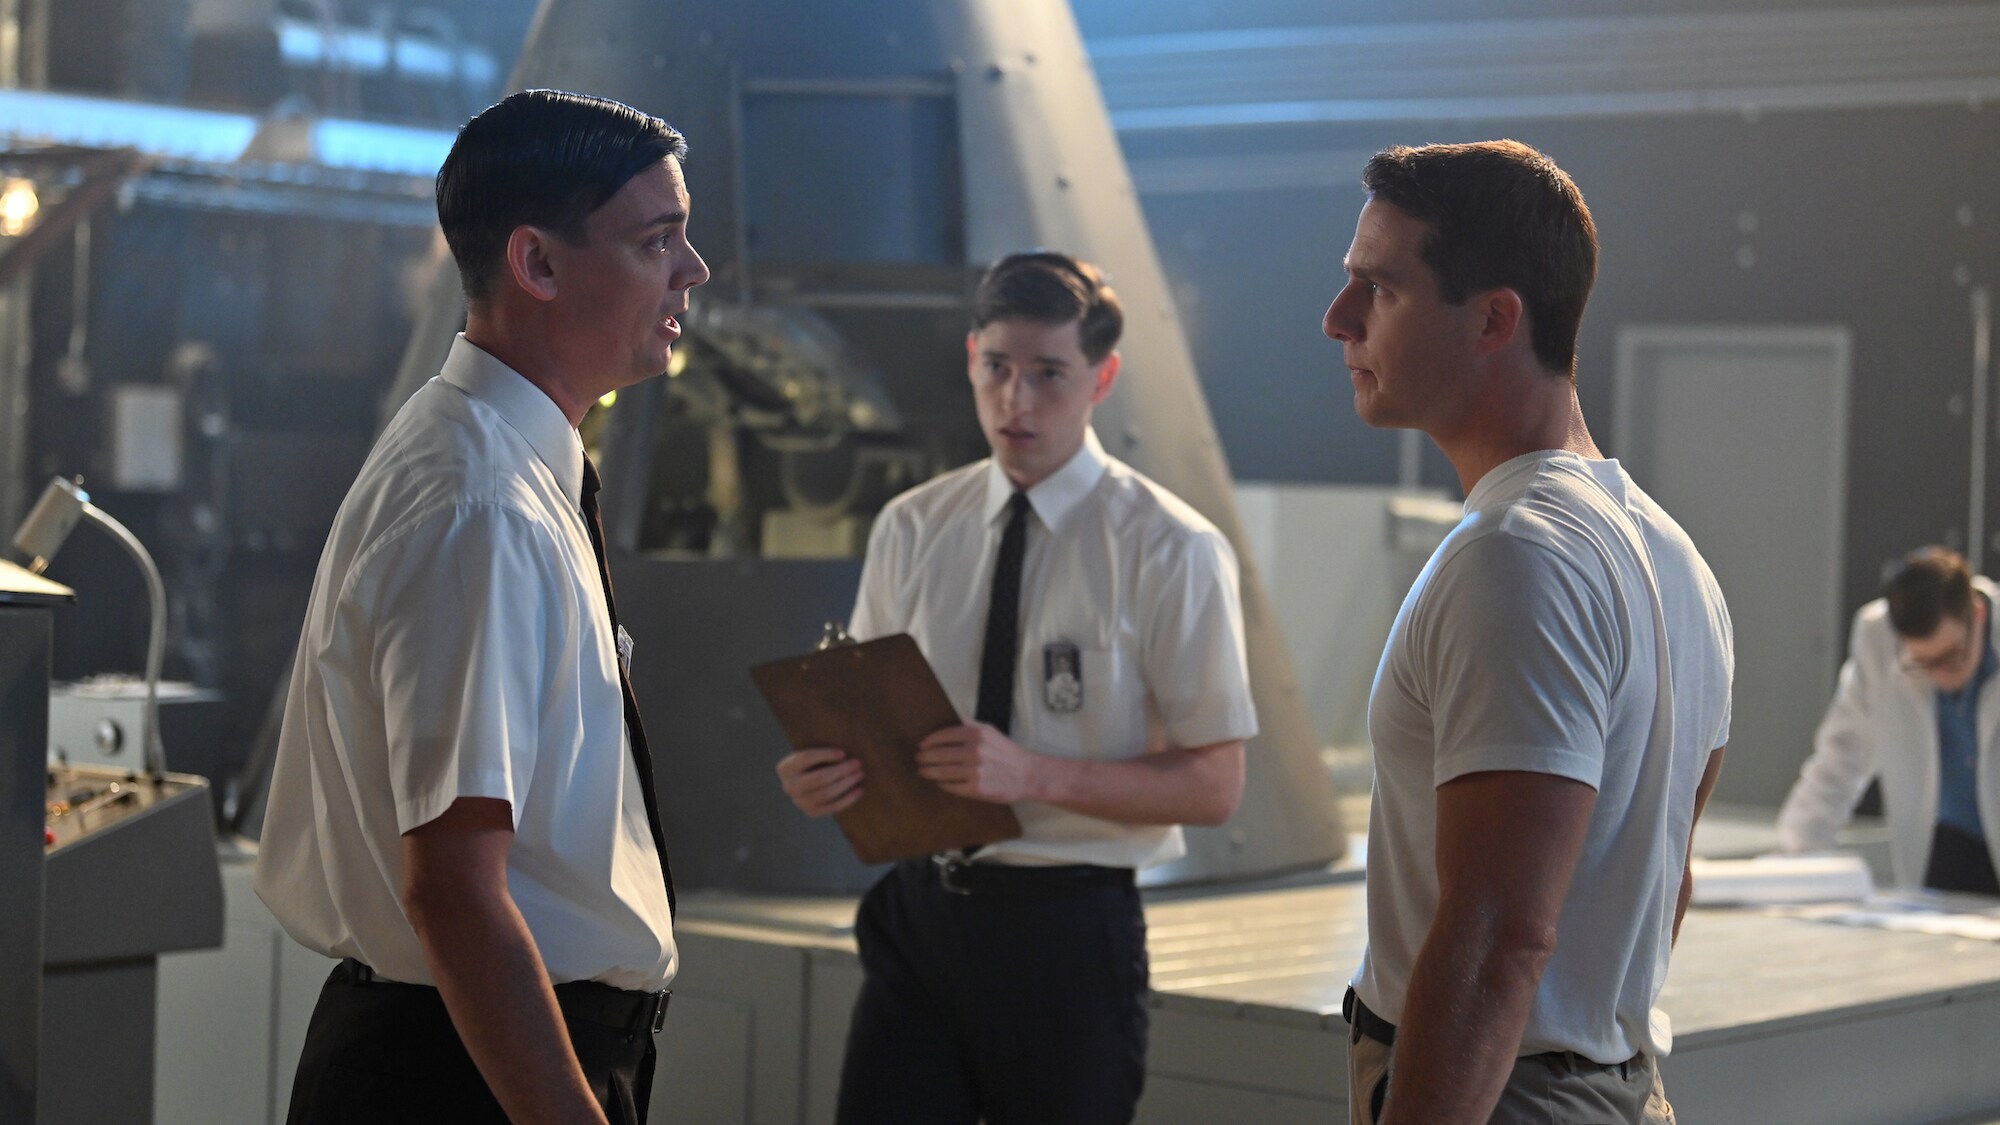 L to R: Joshua Ritter as Roy Hutmacher, Jackson Pace as Glynn Lunney and Jake McDorman as Alan Shepard during a training session in National Geographic's THE RIGHT STUFF streaming on Disney+. (Credit: National Geographic/Gene Page)